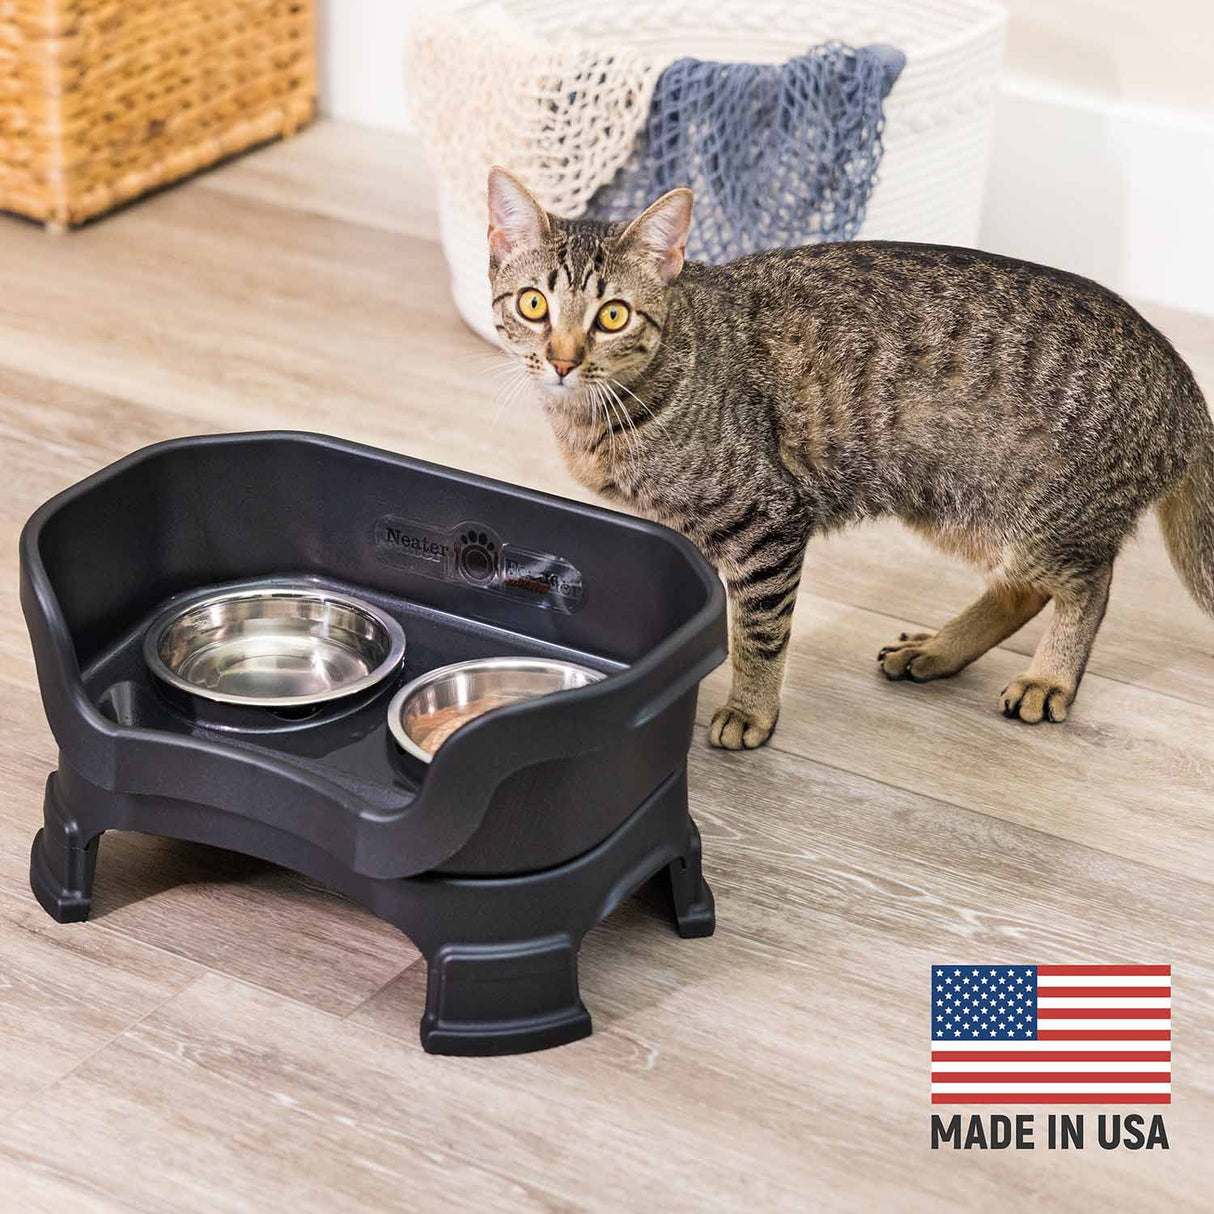 Cat next to Black Neater Feeder Deluxe - Made in the USA